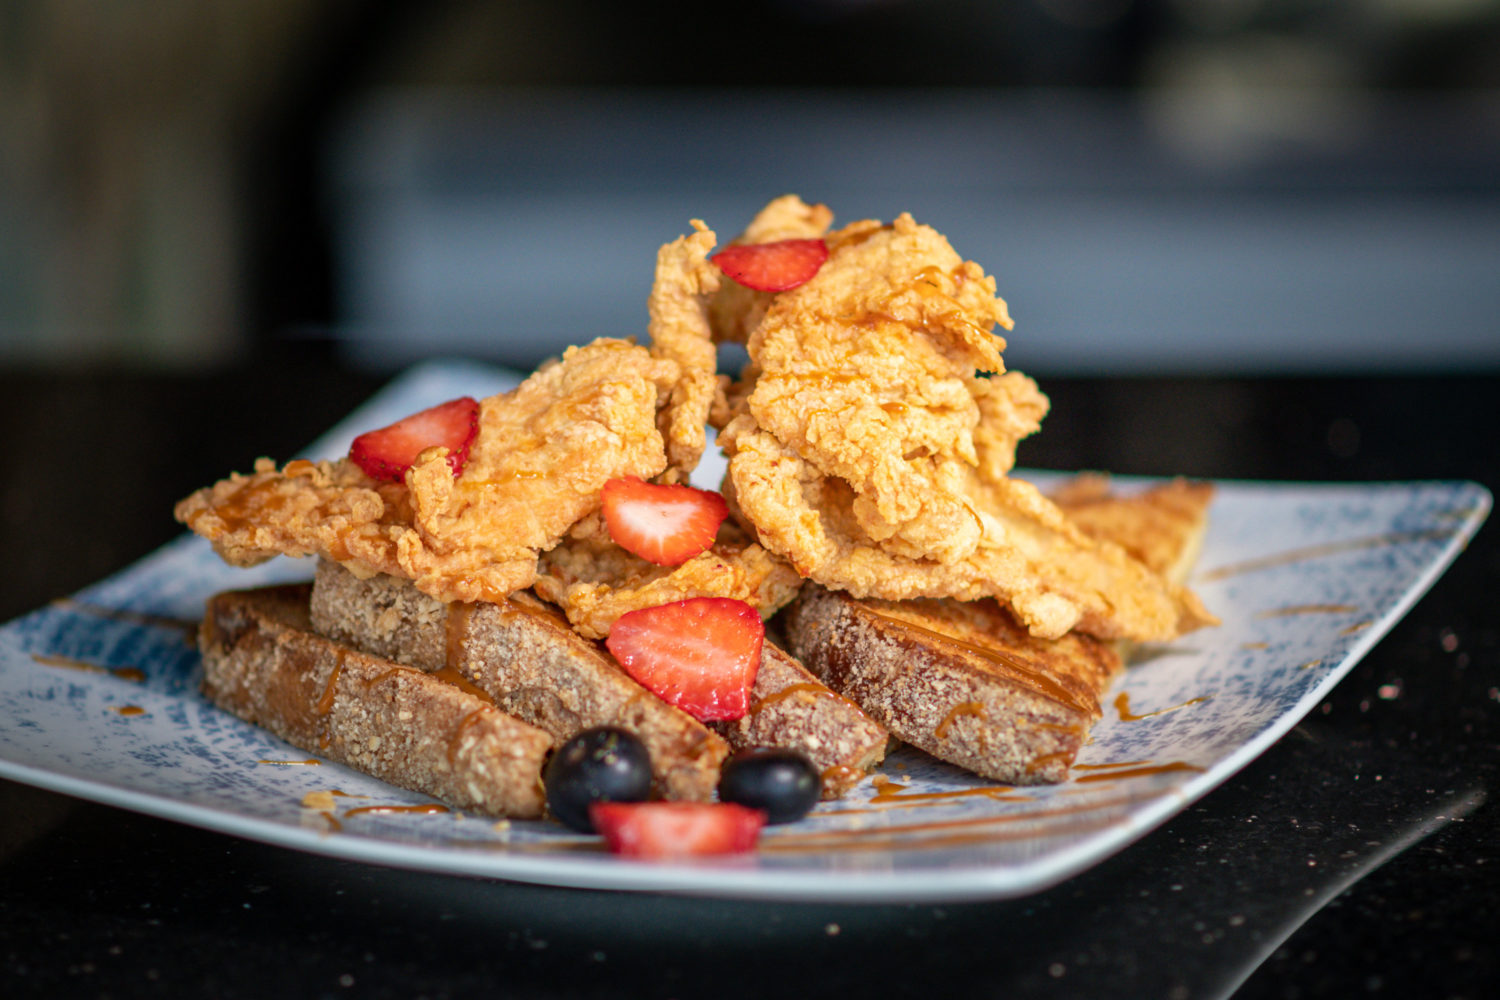 KitchenCray's fried chicken with French toast. Photograph by John Rorapaugh.